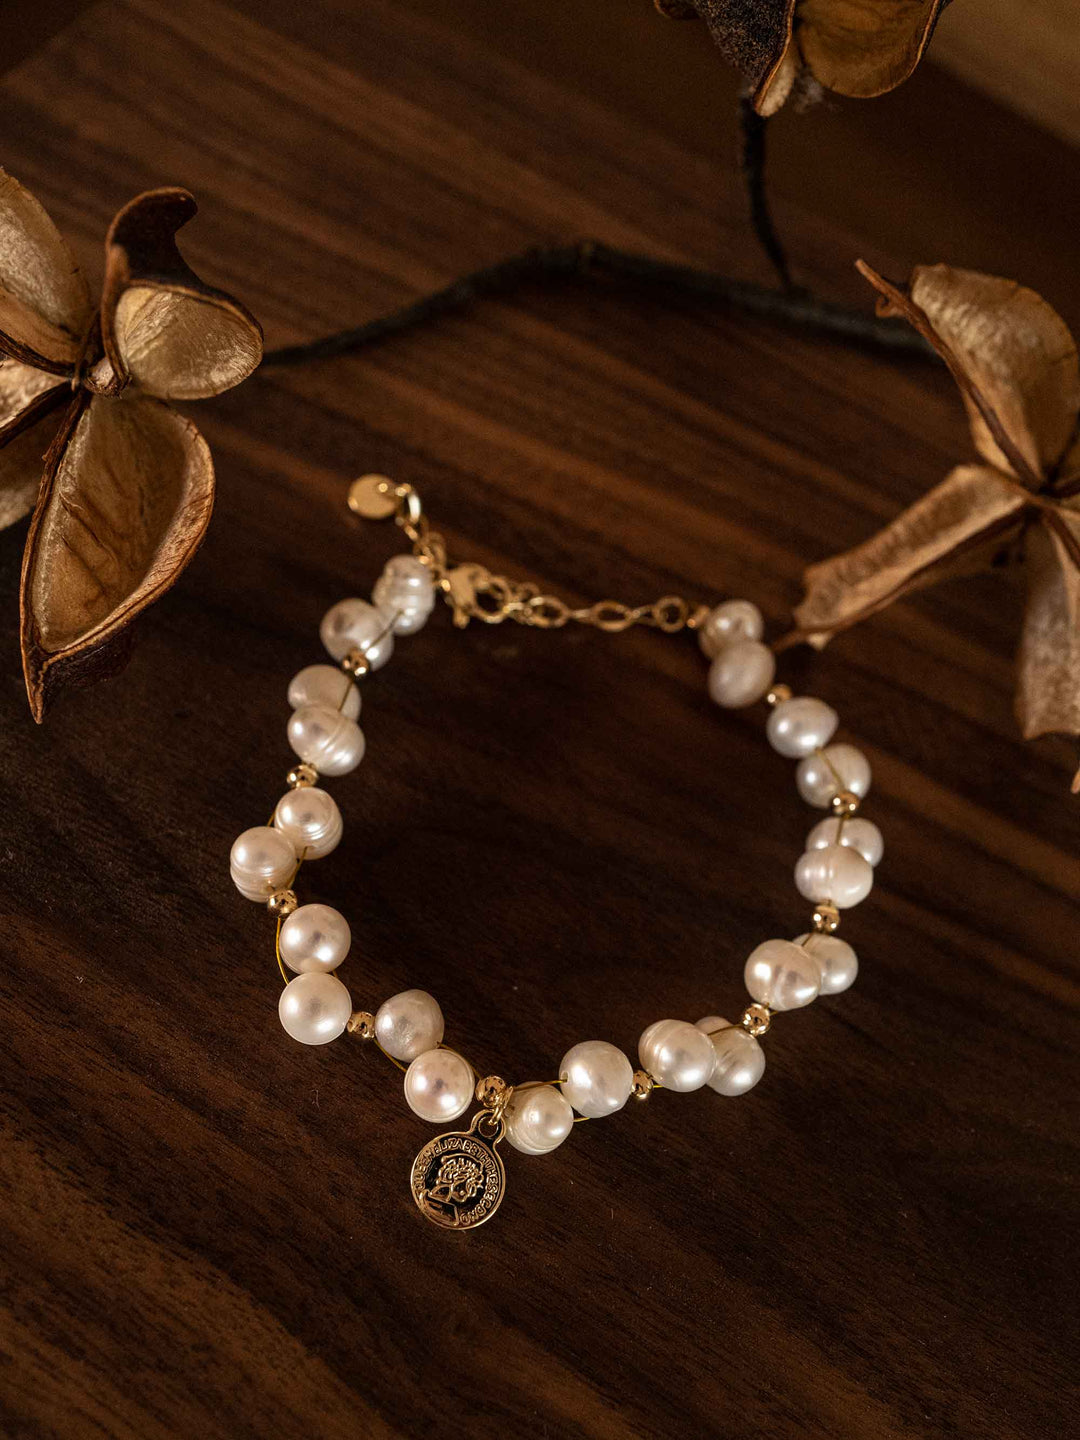 A pearl bracelet with Roman gold coins